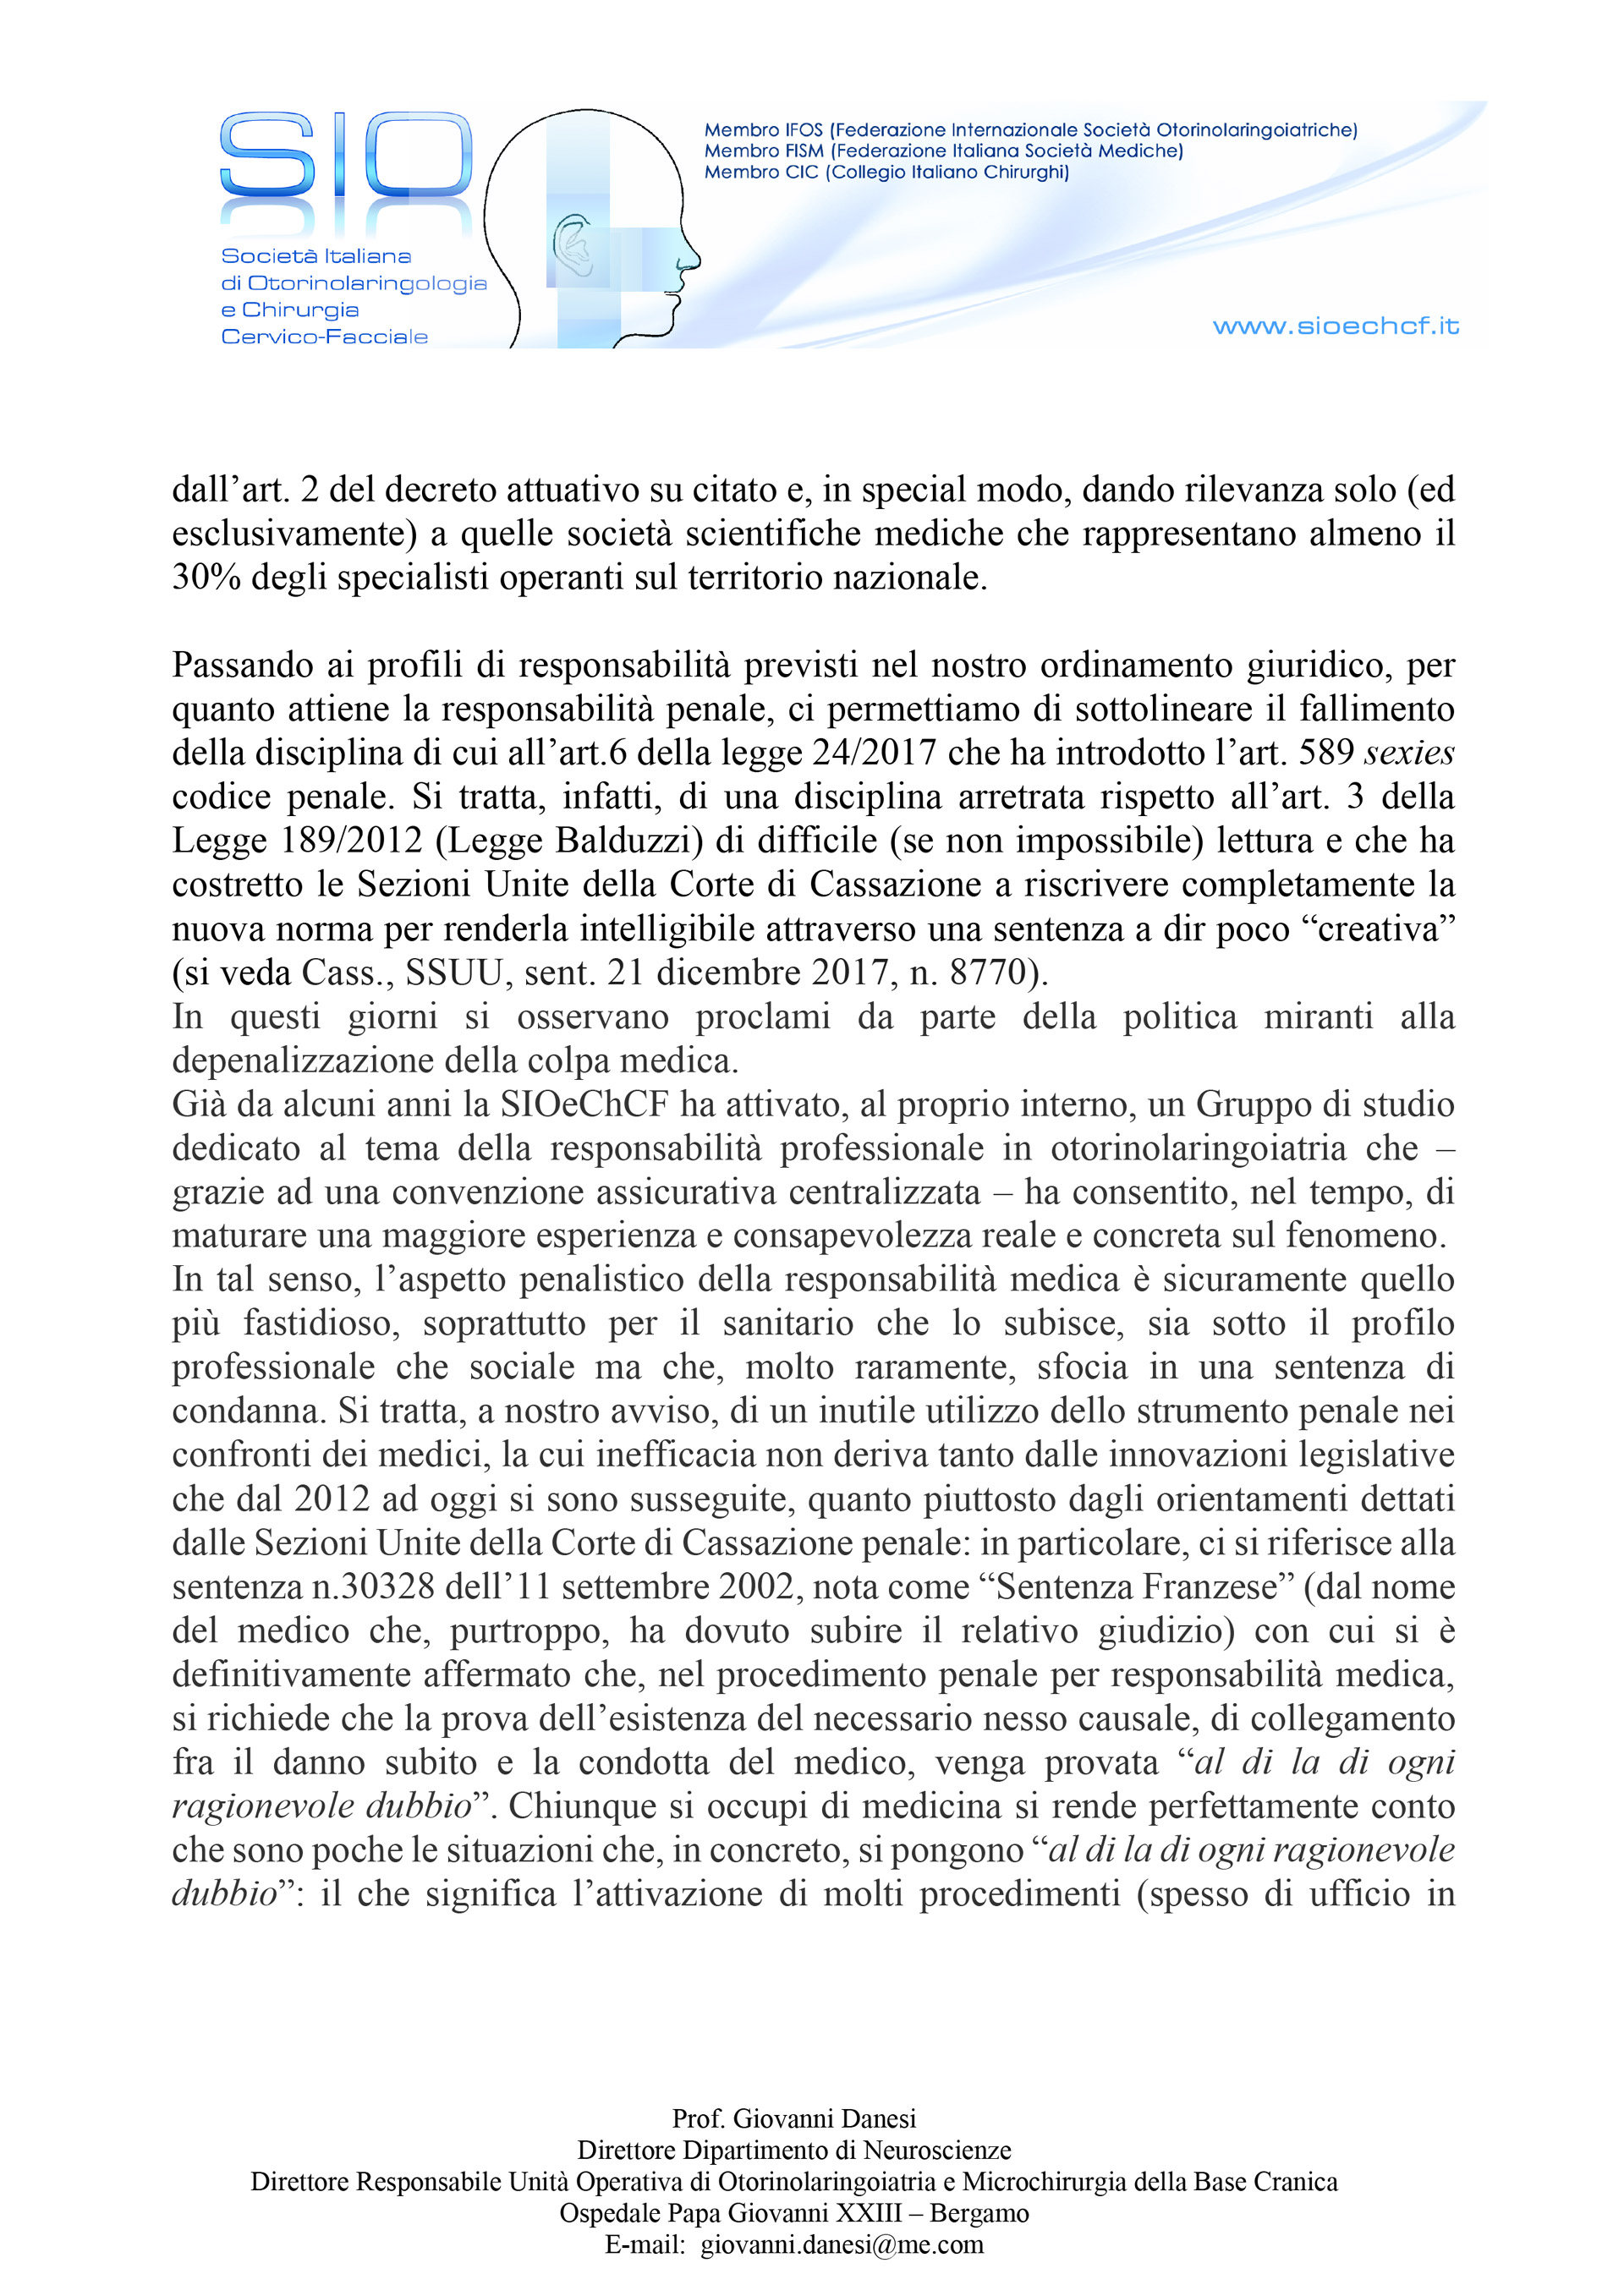 LetteraSIOperCIC-2